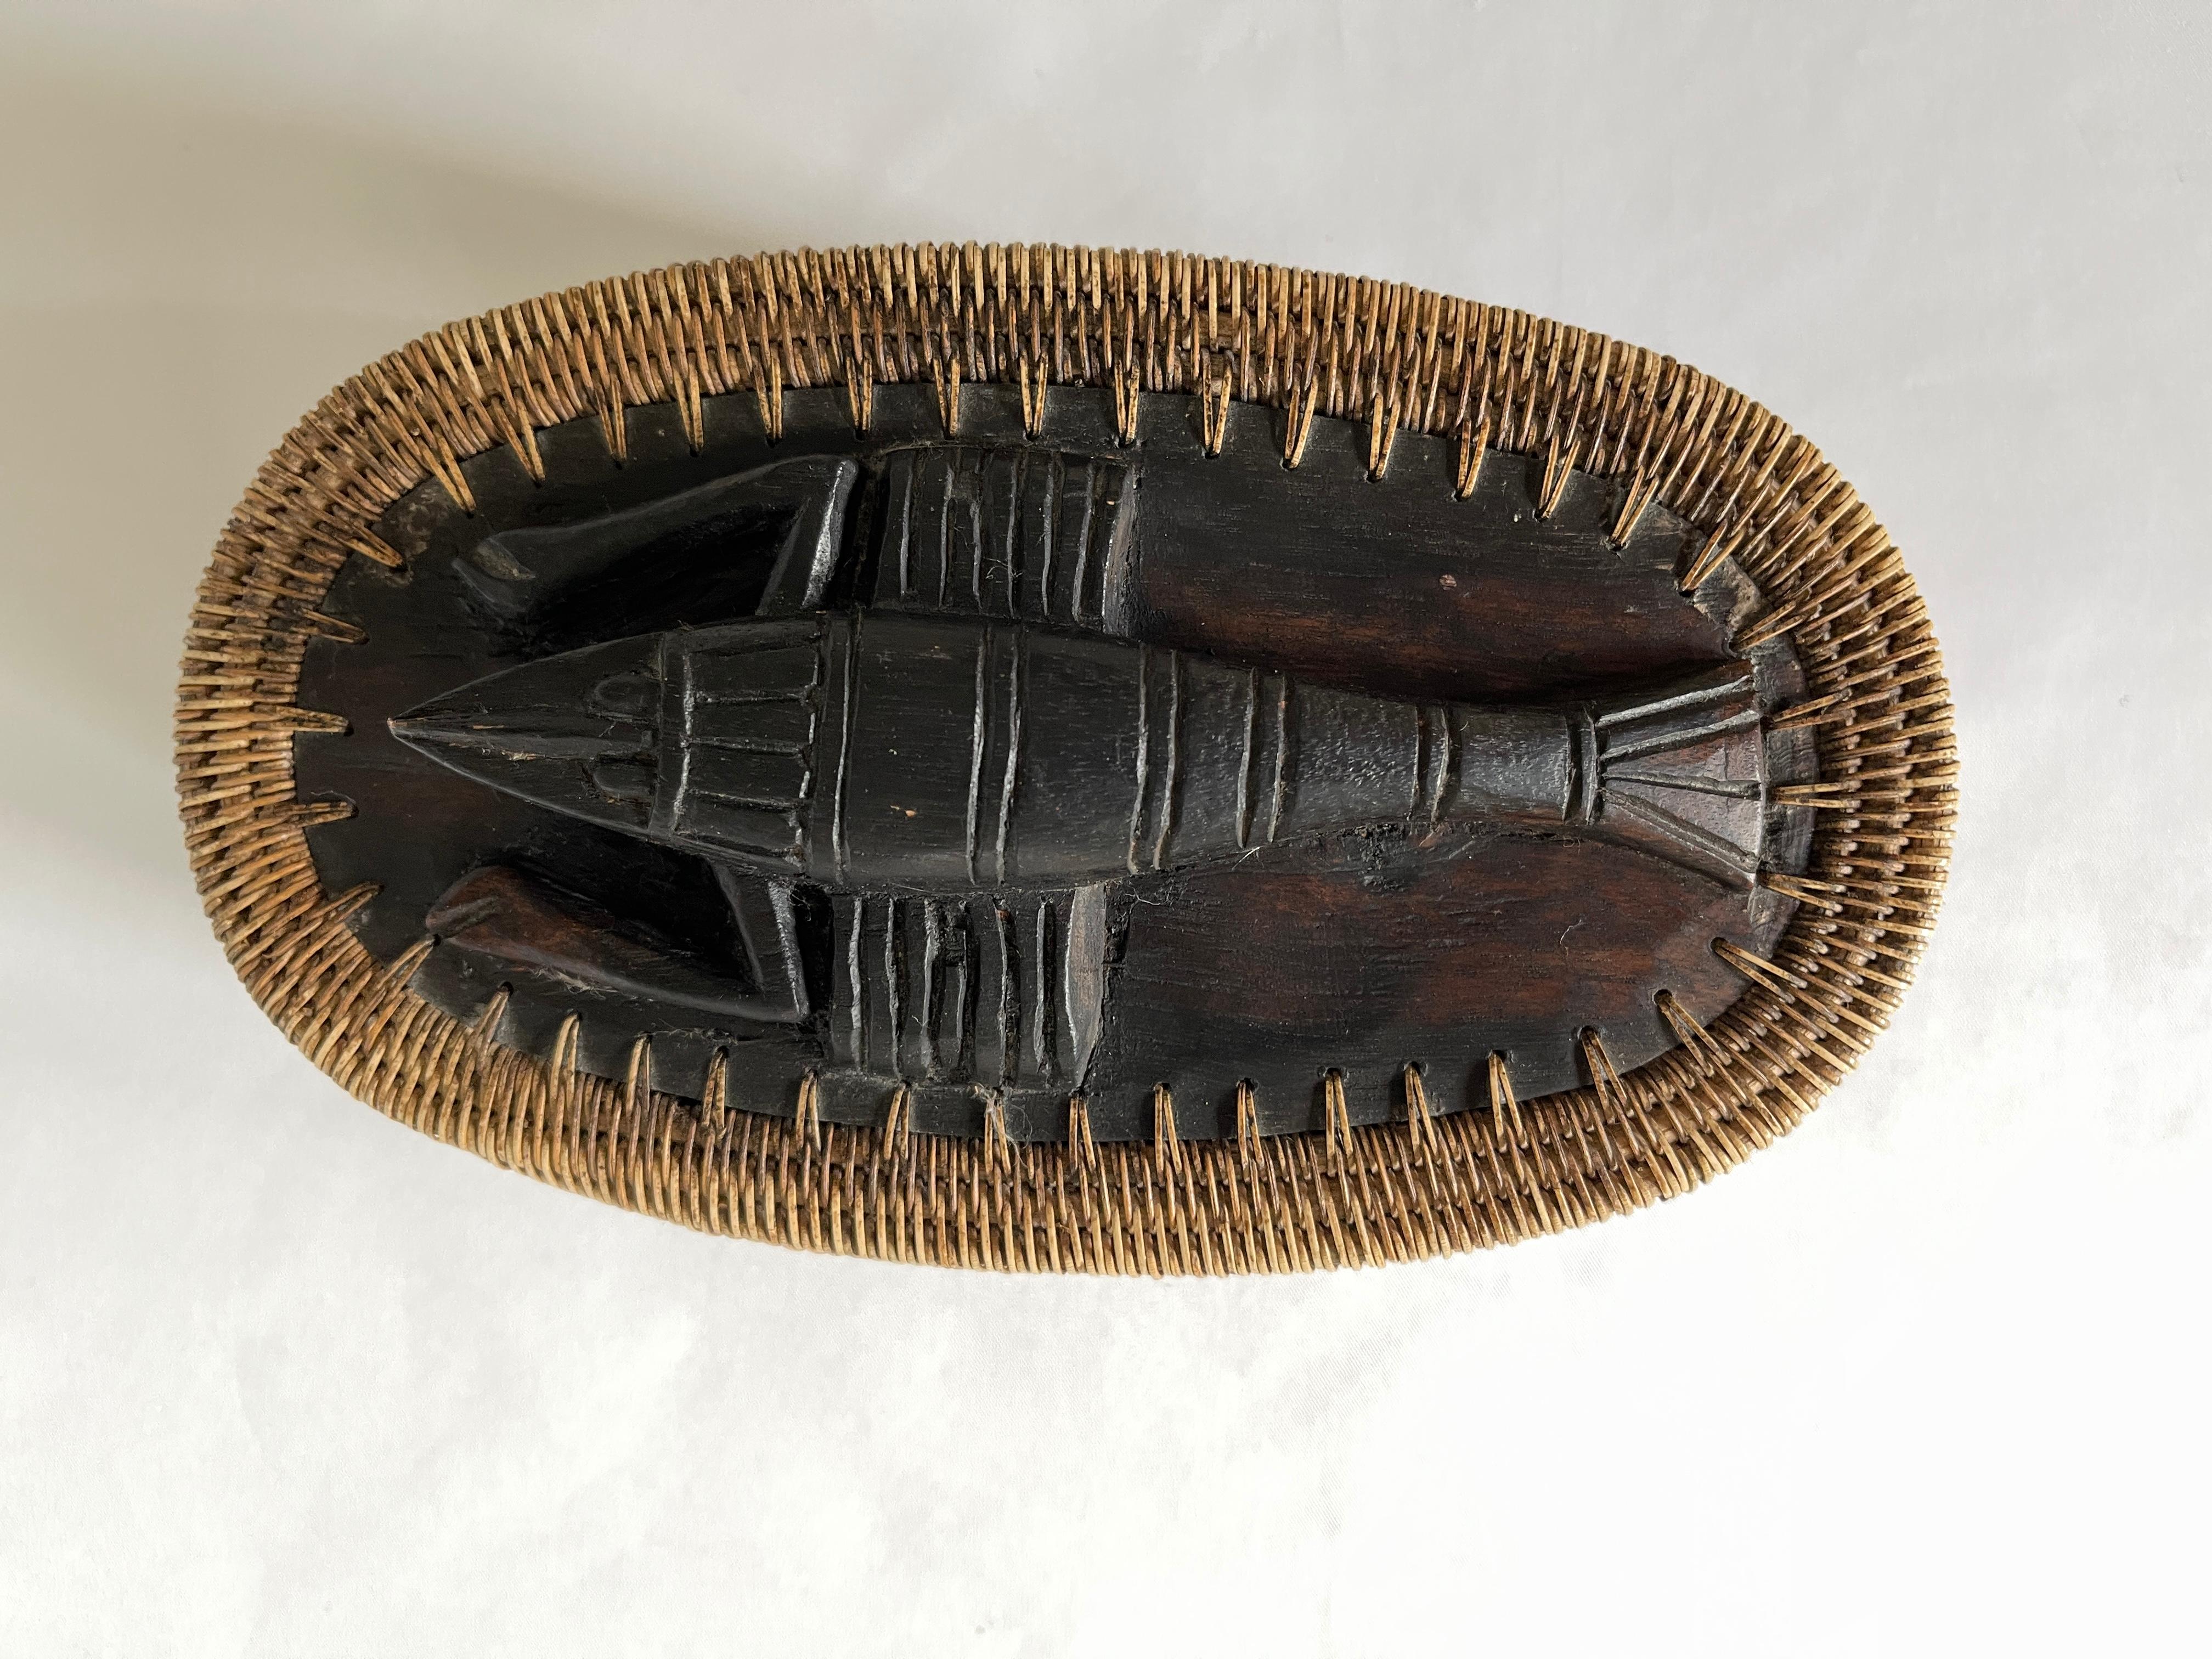 Hand-Woven Hand Woven Oval Reed Basket with Carved Wooden Crawfish Lid